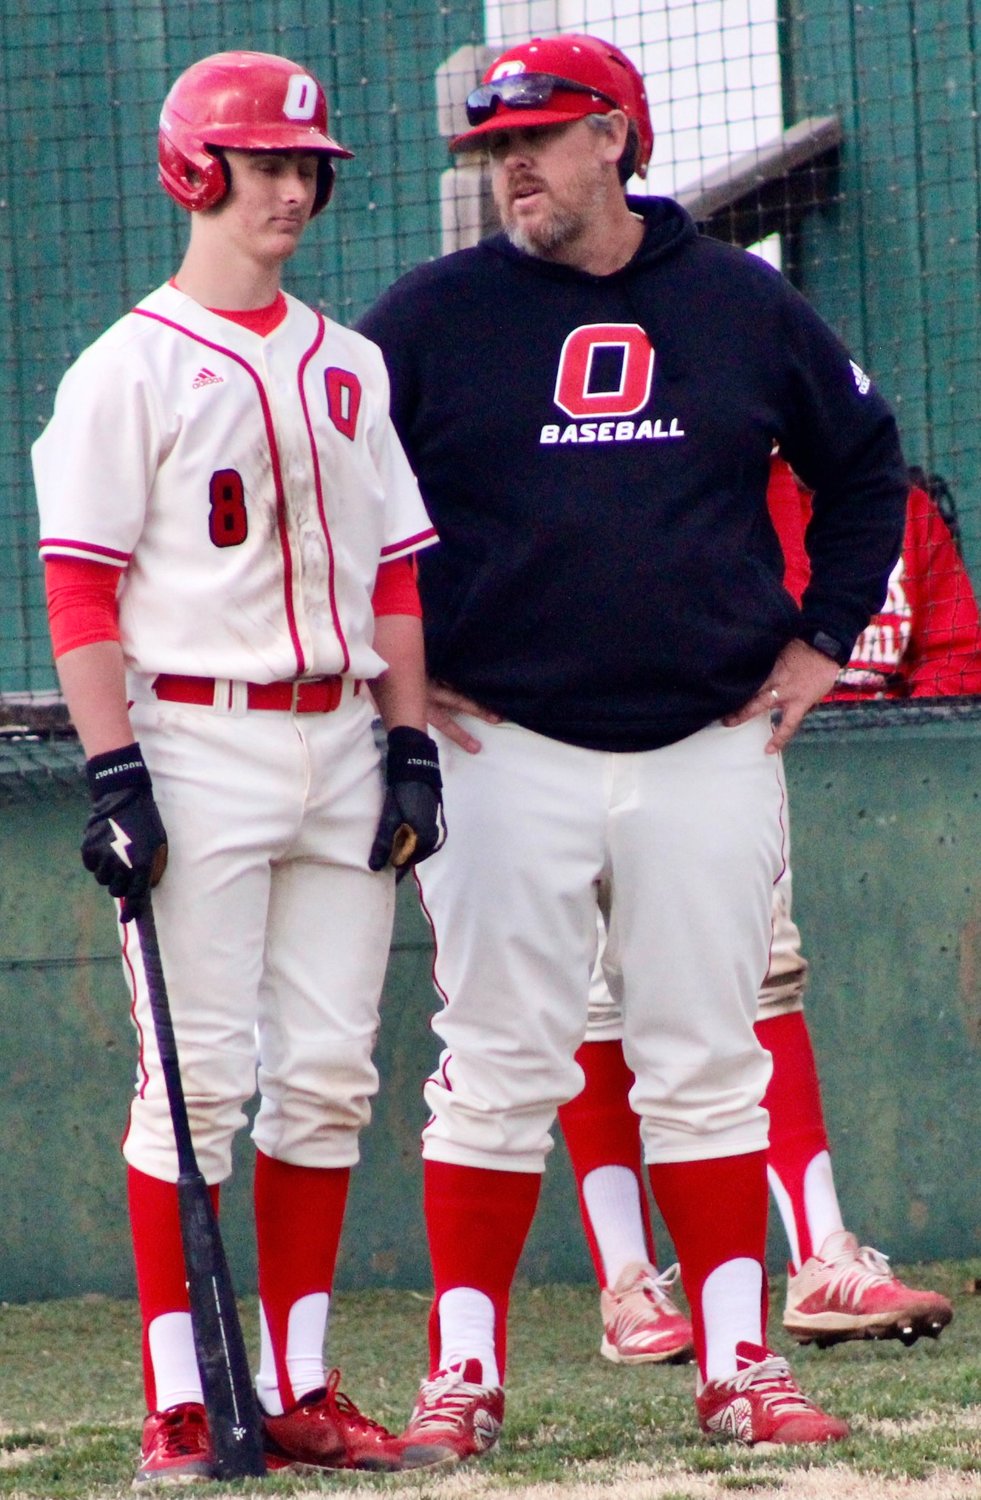 OZARK COACH JUSTIN SUNDLIE chats with catcher Cooper Buvid.